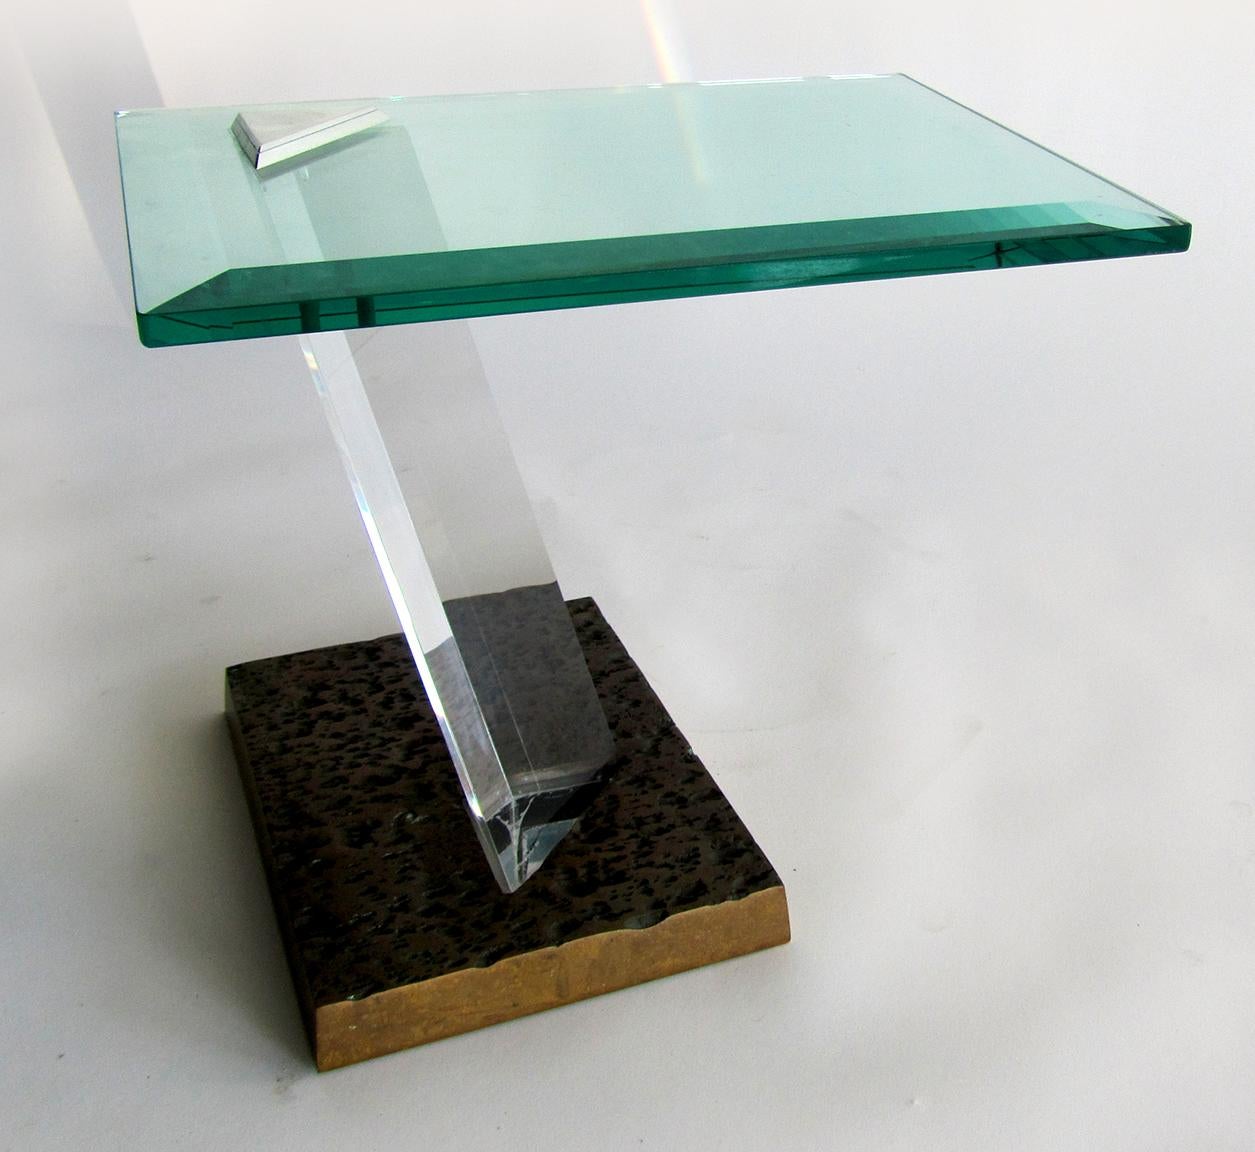 A sculptural side table by Jeffrey Bigelow, with a weighted bronze Brutalist base. The pedestal is faceted, angled Lucite and joins the base with the glass top. The Lucite is signed. The modern lines and weightlessness of this piece make this an